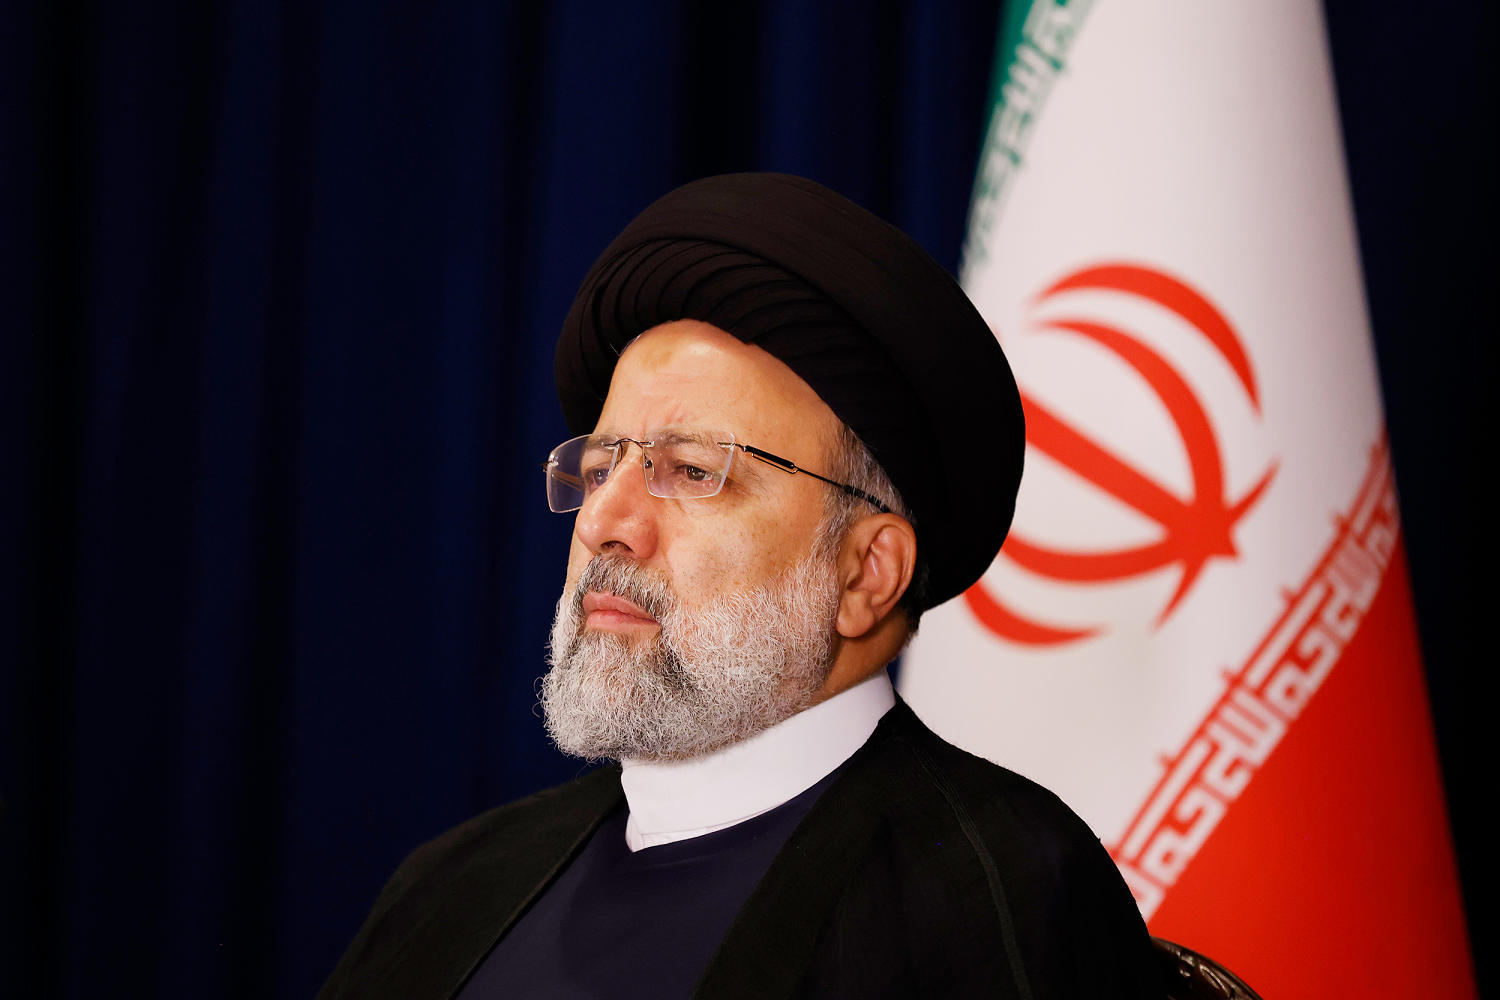 Helicopter carrying Iran's President Raisi suffers 'crash landing'; search and rescue underway